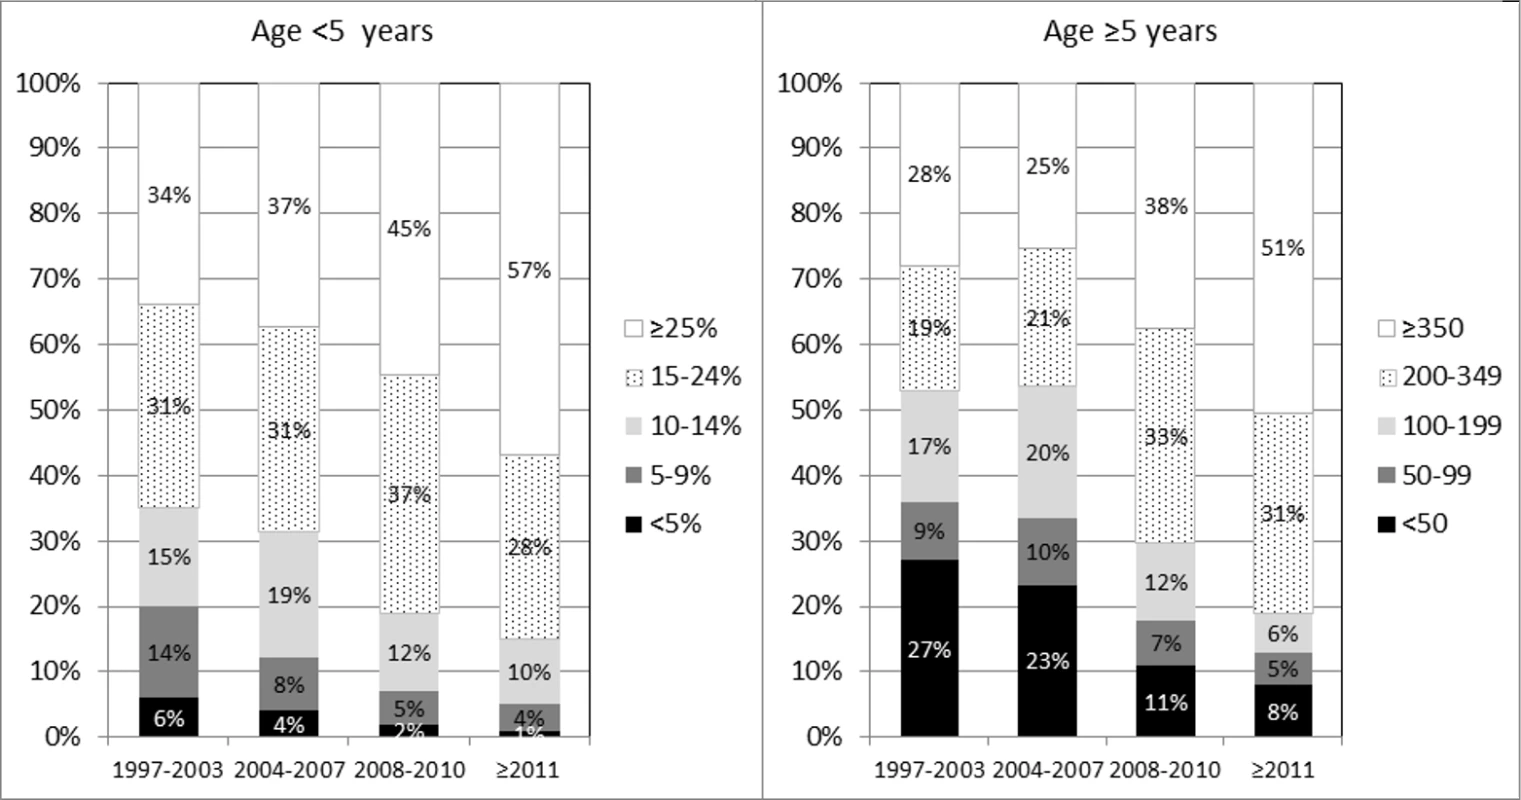 CD4% (left panel) and count (right panel) at initiation of cART, by age group and calendar period.